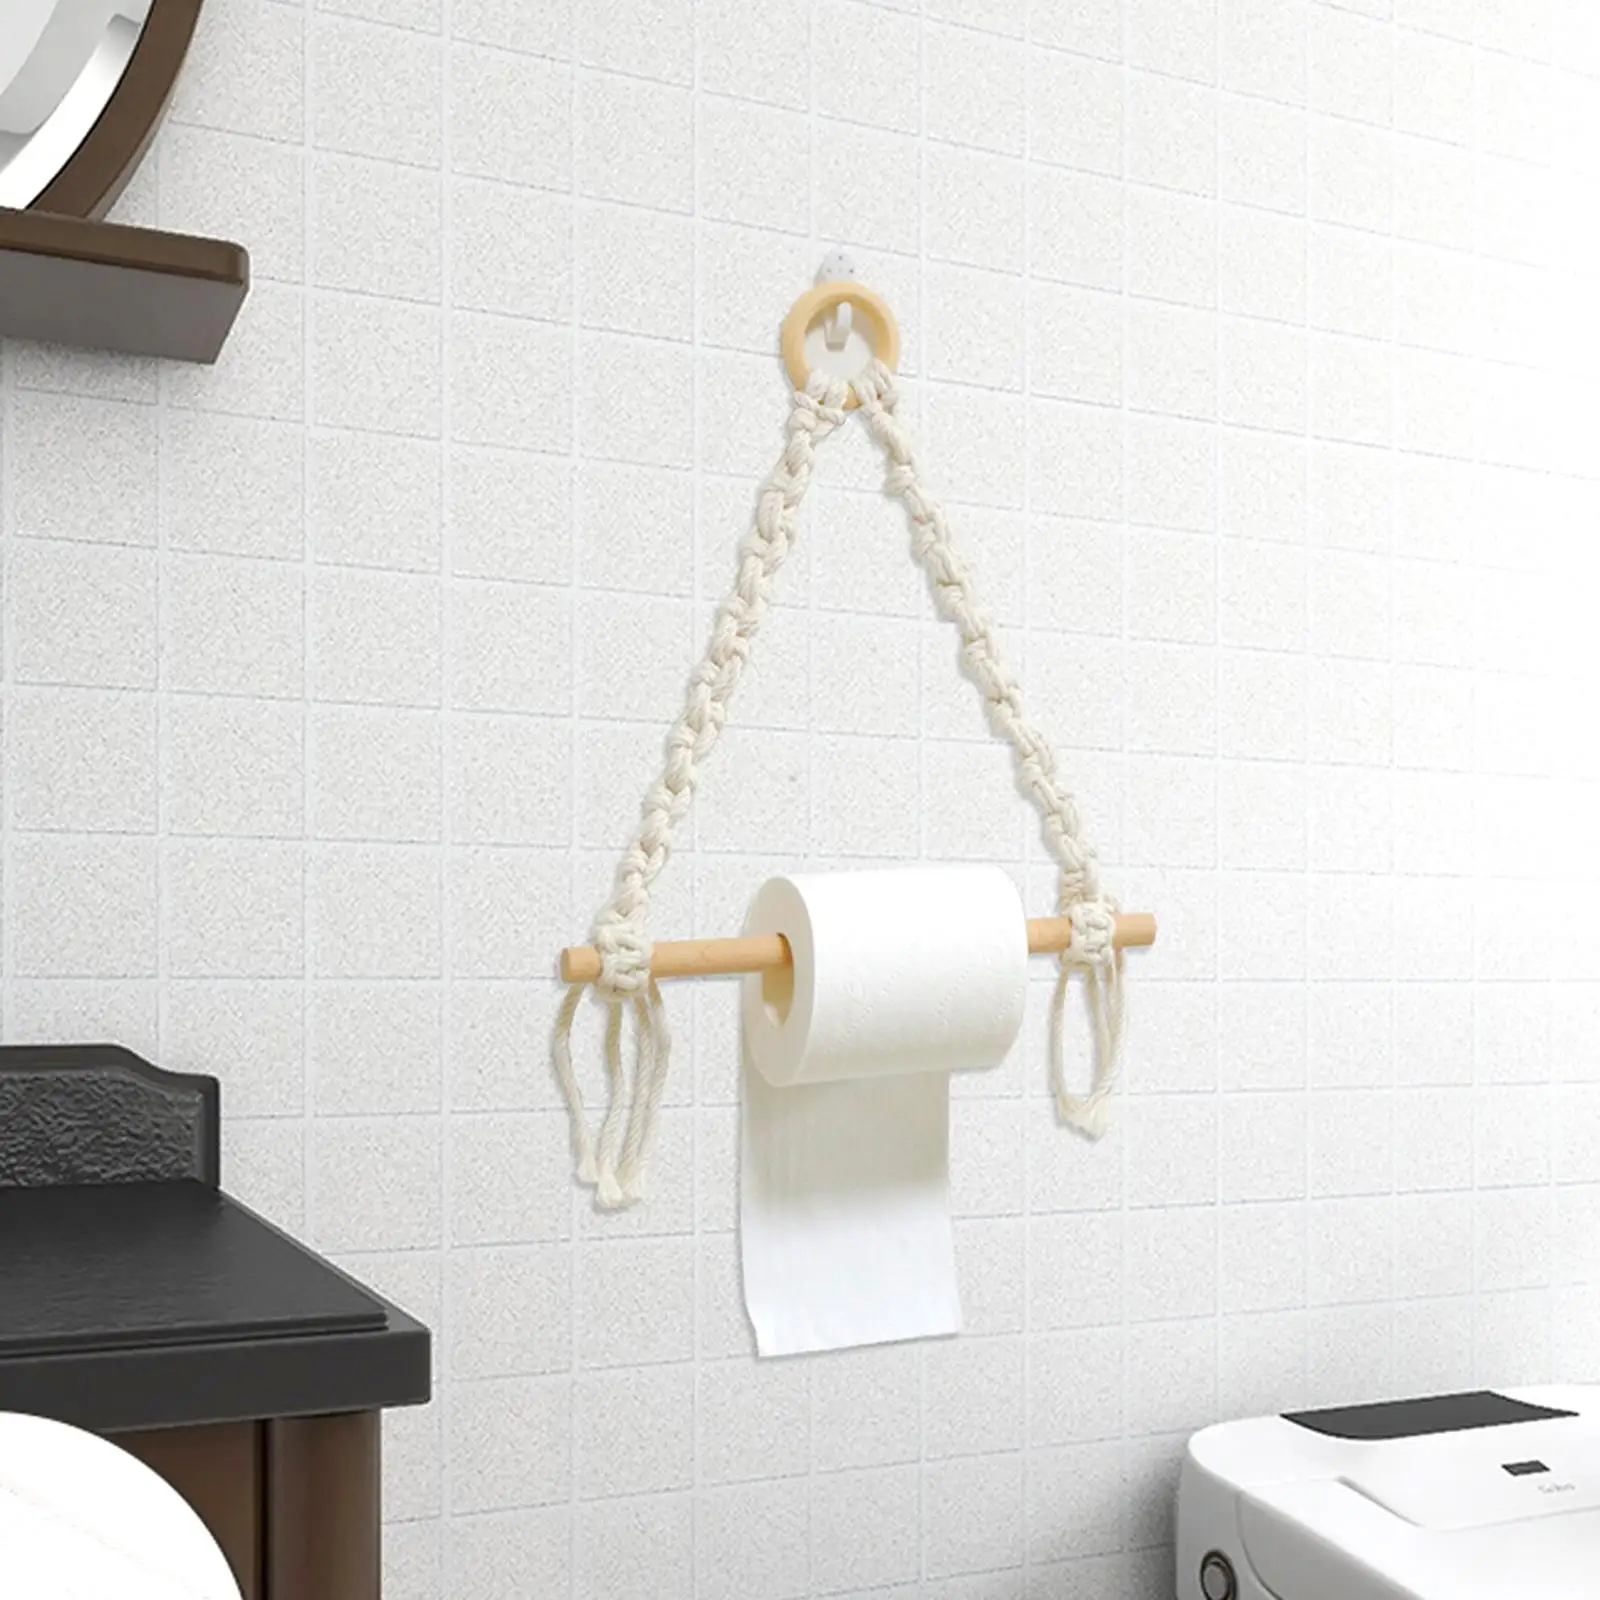 Toilet Roll Holder Practical Rustic Toilet Decor Durable Rope Wall Mount Roll Napkin Holders Wall Tapestry for Hotel Kitchen